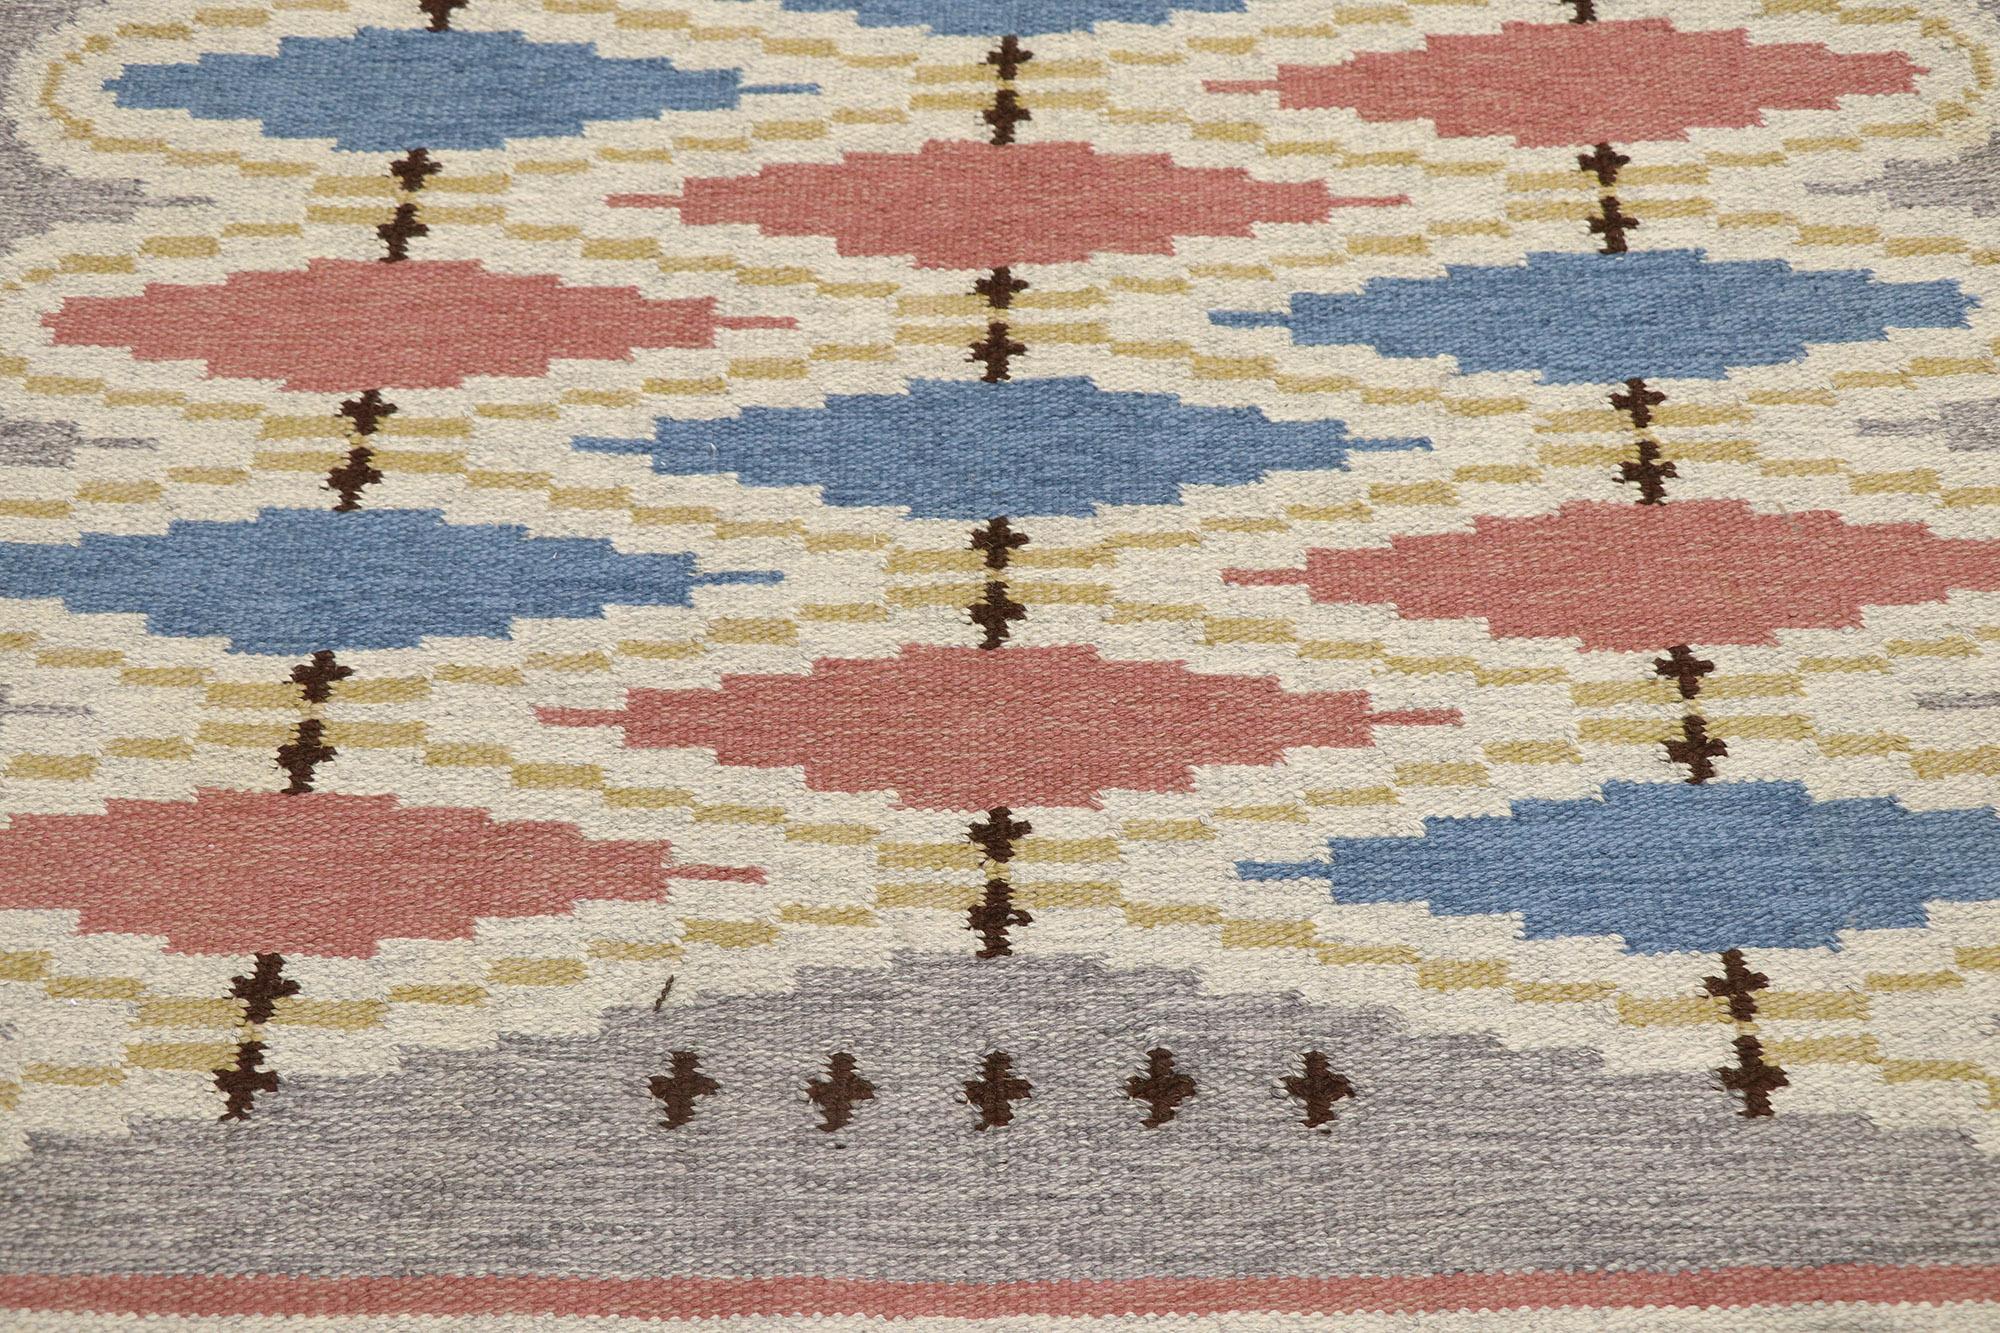 Vintage Swedish Rollakan Kilim Rug with Scandinavian Modern Style In Good Condition For Sale In Dallas, TX